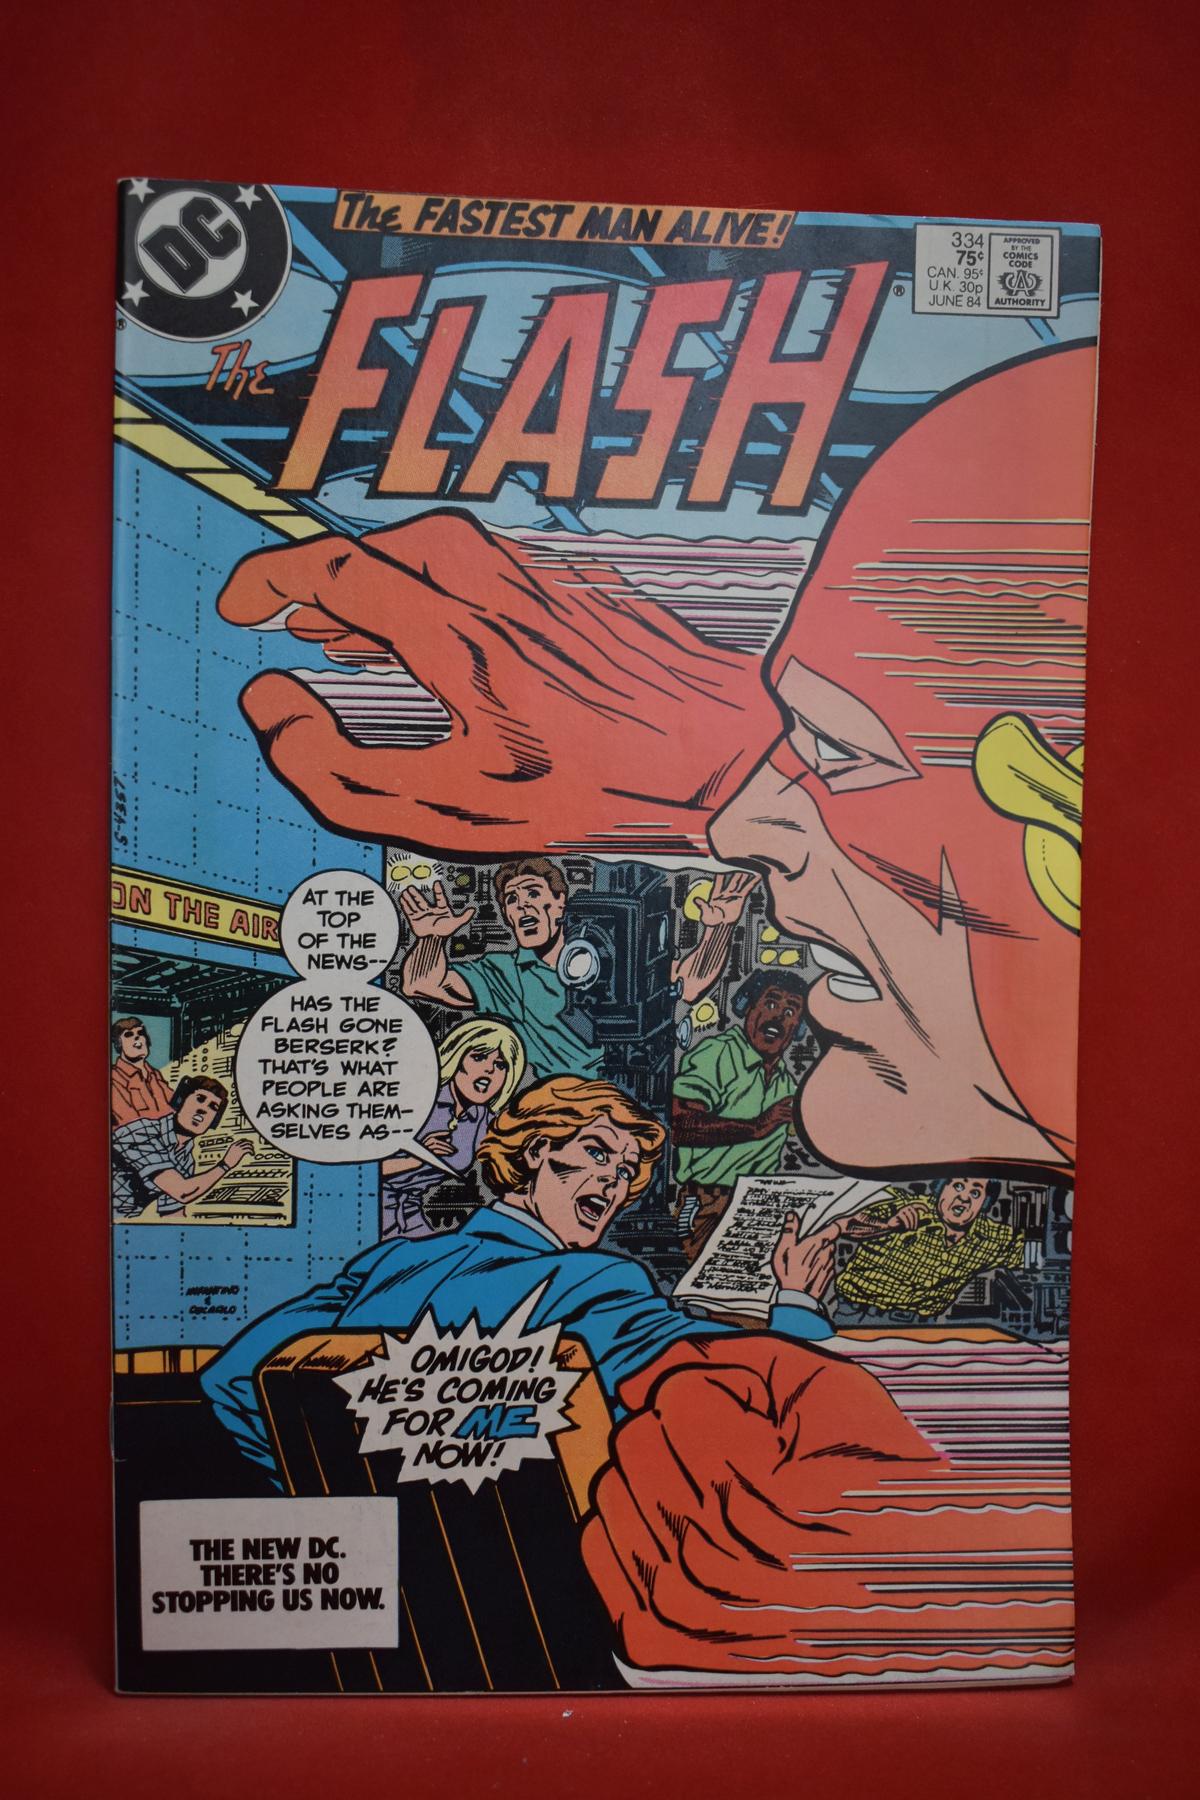 FLASH #334 | THE FLASH FREAK OUT! | INFANTINO - 1984